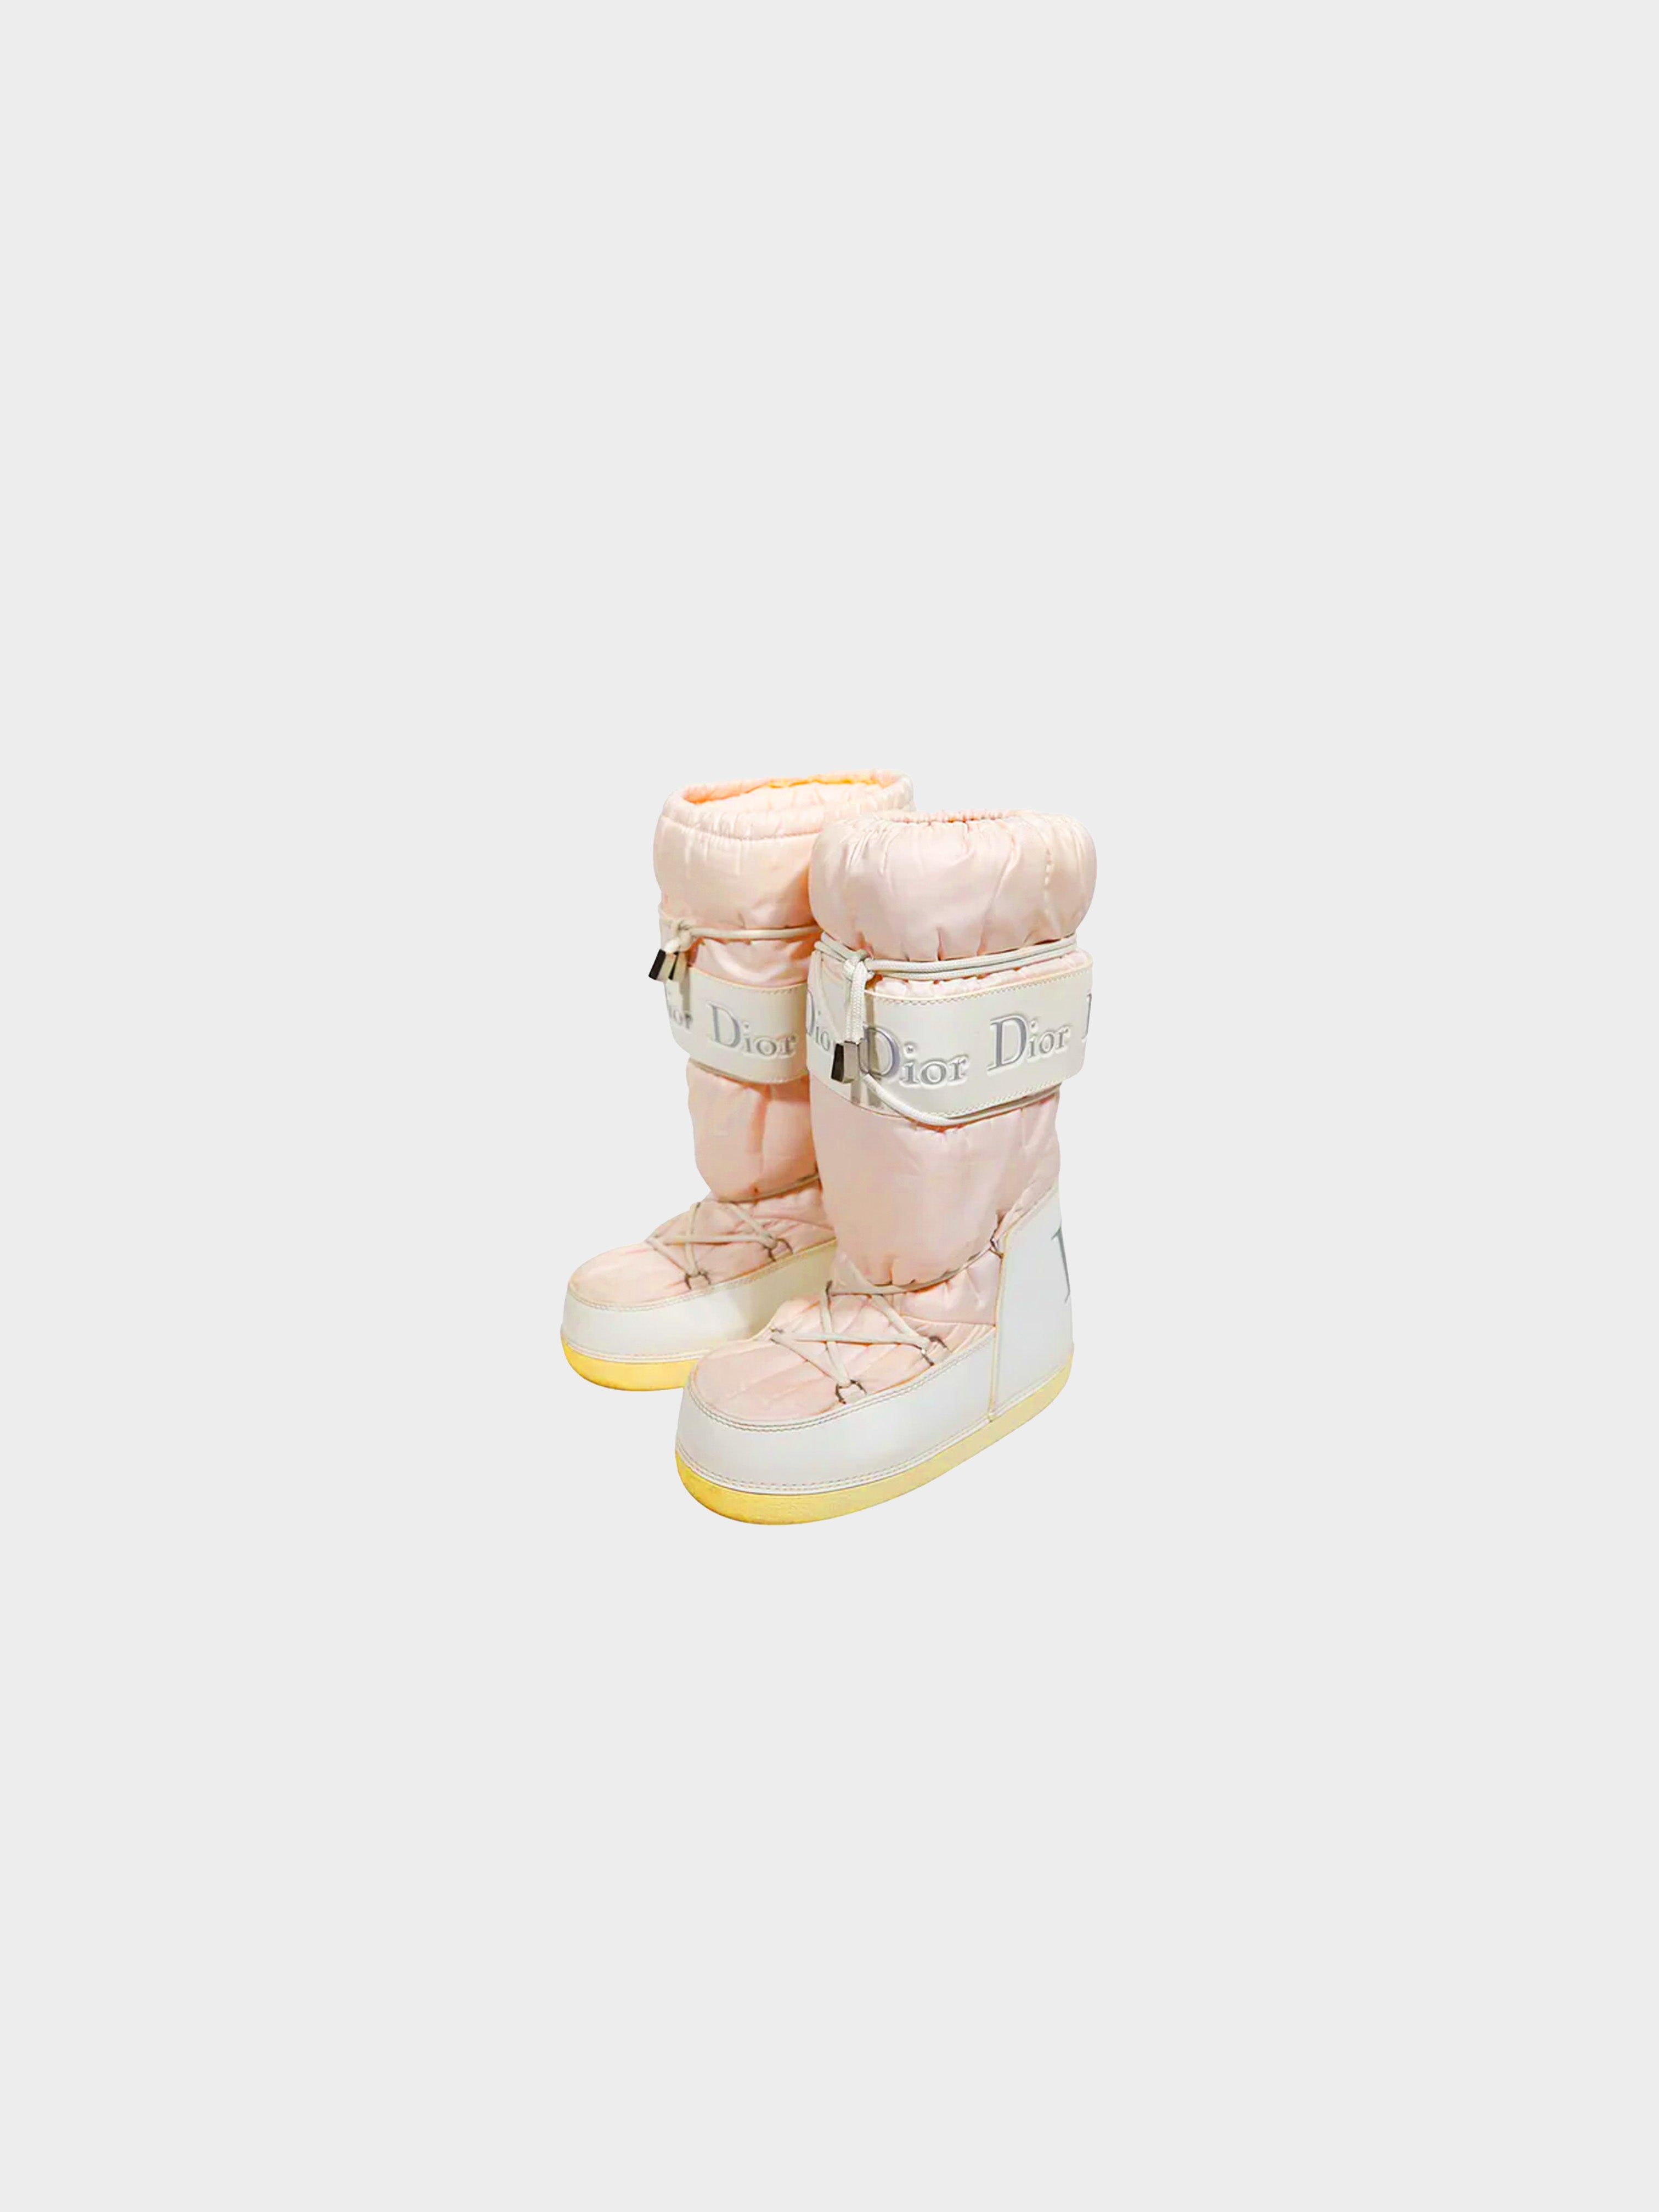 Christian Dior by John Galliano 2000s Baby Pink Moon Boots · INTO